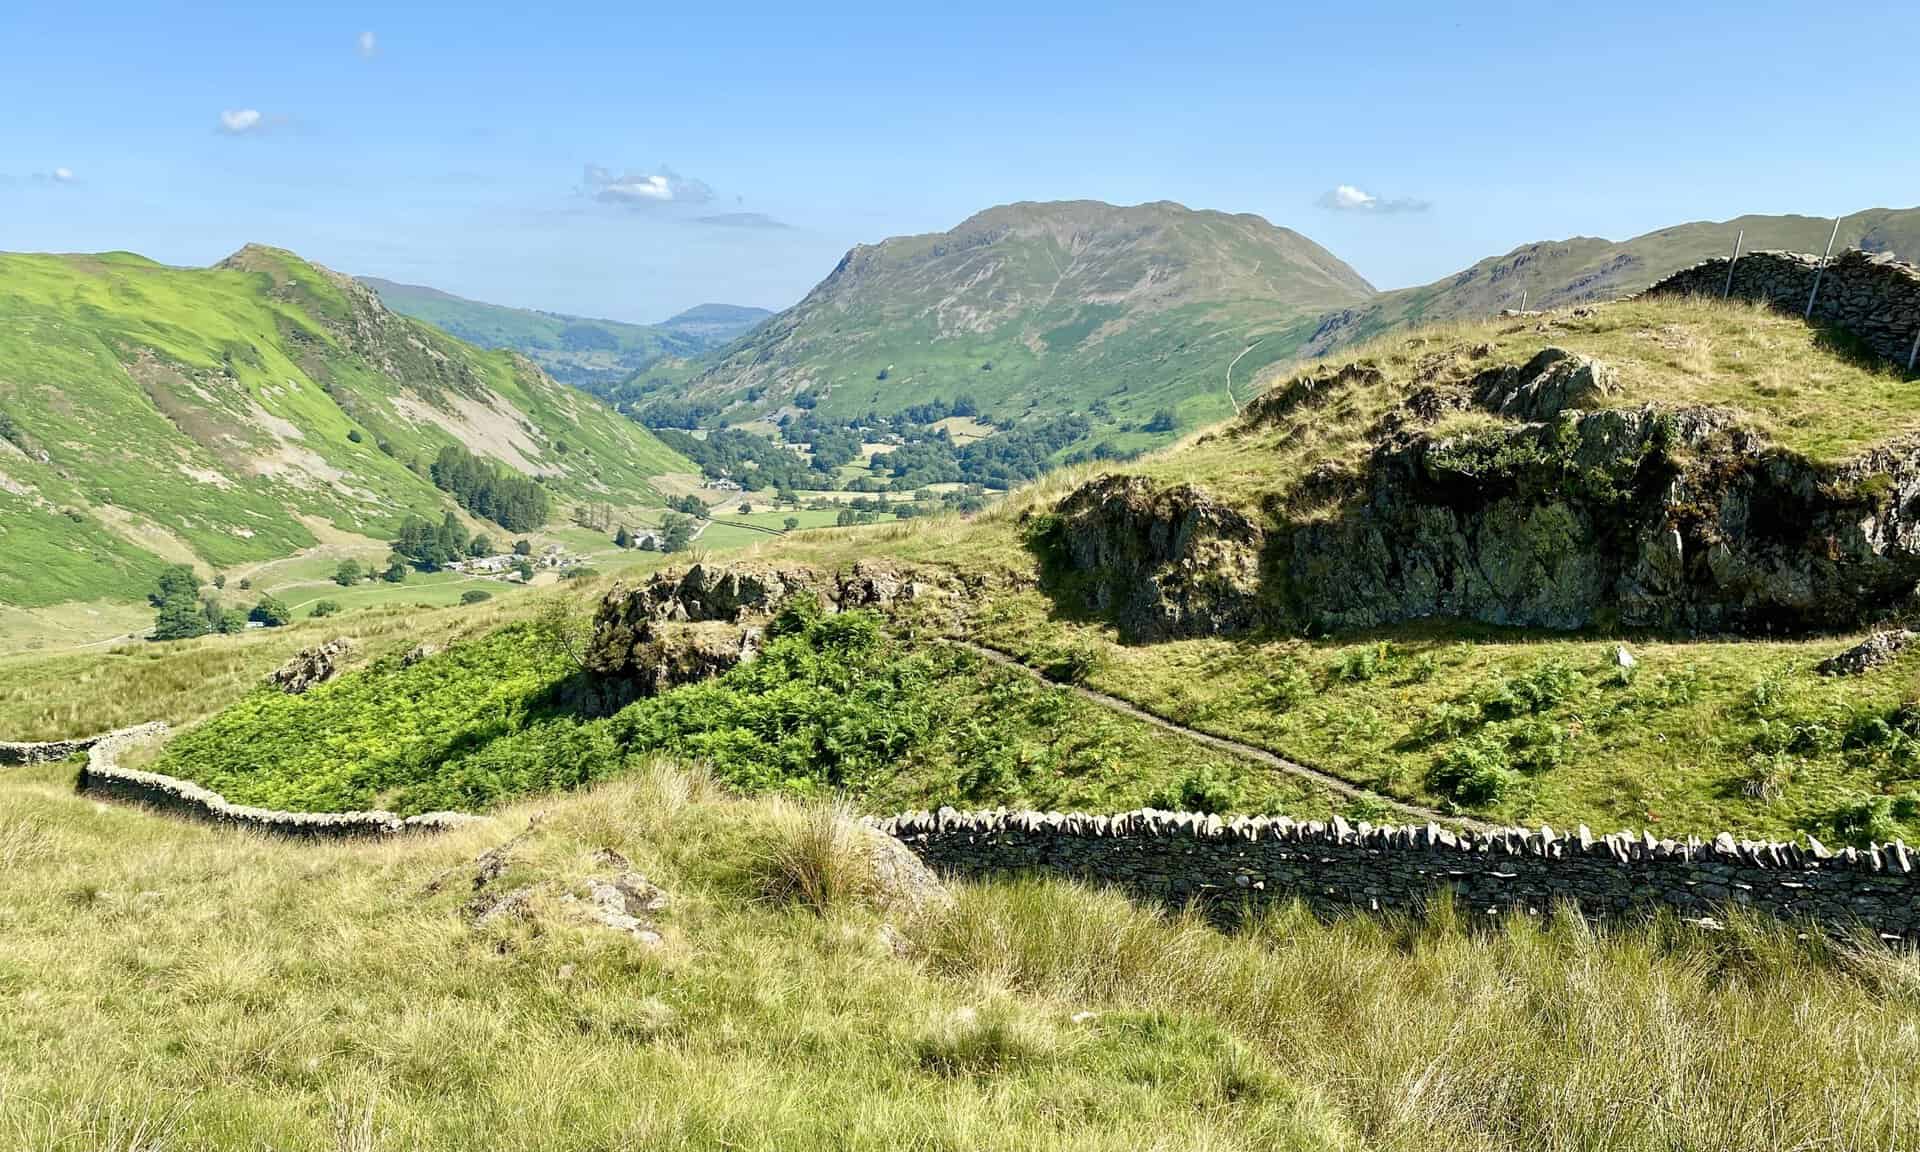 The view down to Deepdale and the valley floor between Patterdale and Hartsop. The huge mountain in the centre of the picture is Place Fell. To the left is Birks and Arnison Crag.